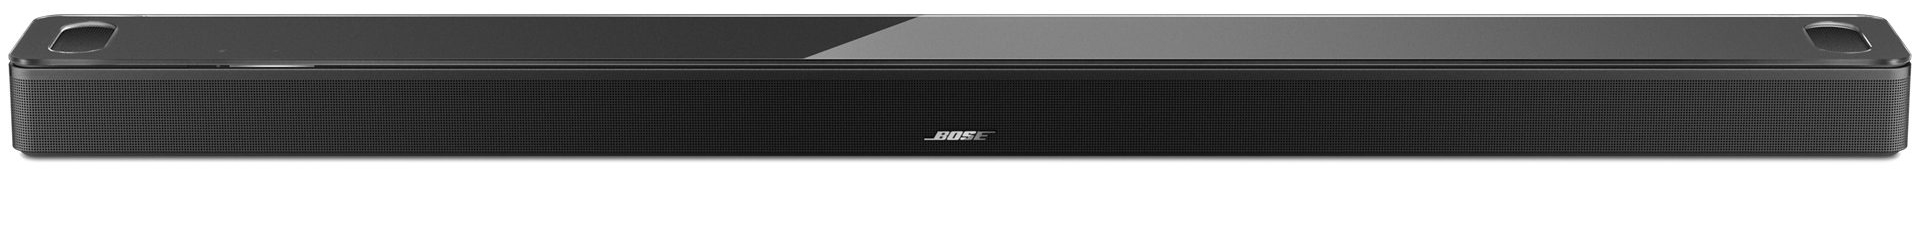 Bose - Smart Soundbar 900 With Dolby Atmos and Voice Assistant 